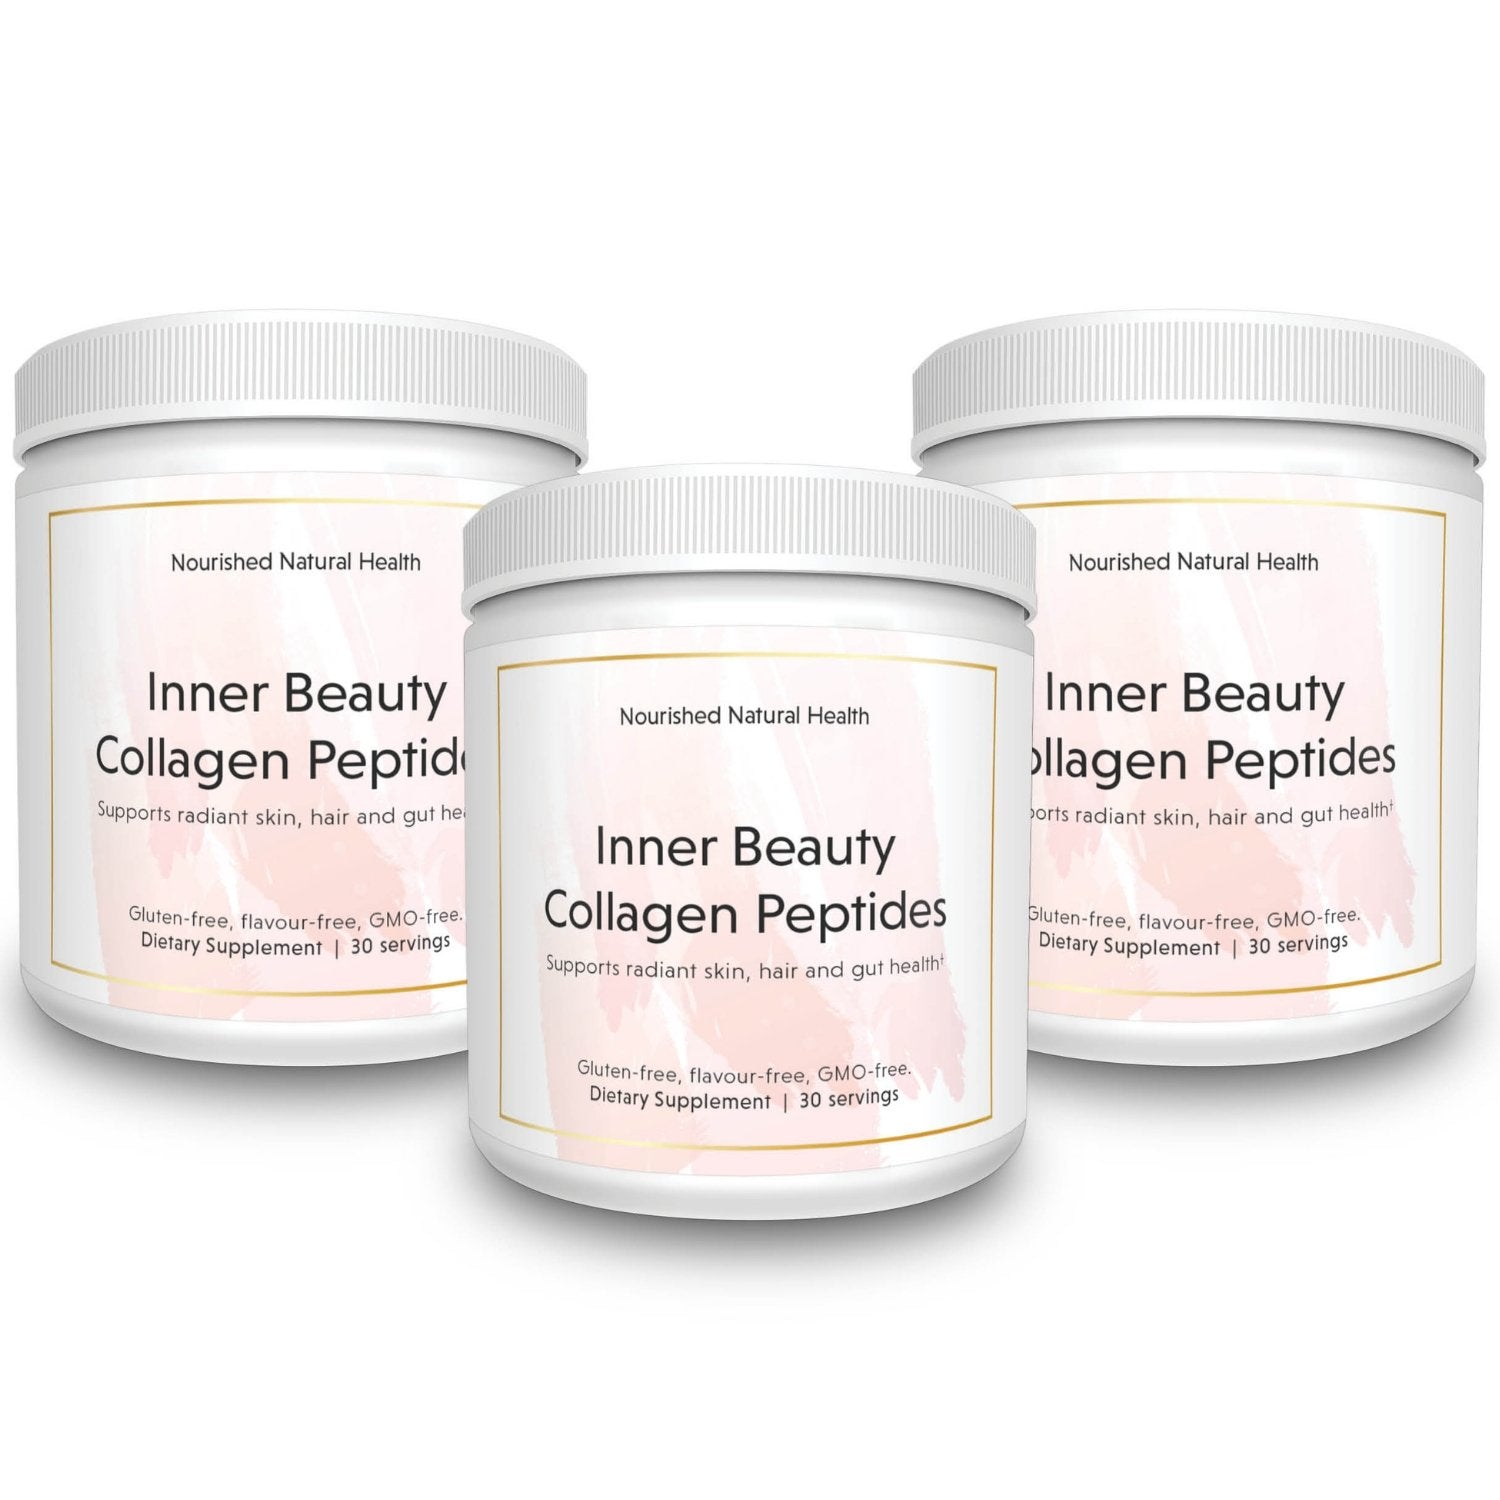 Nourished Inner Beauty Collagen Peptides For PCOS - Nourished Natural Health